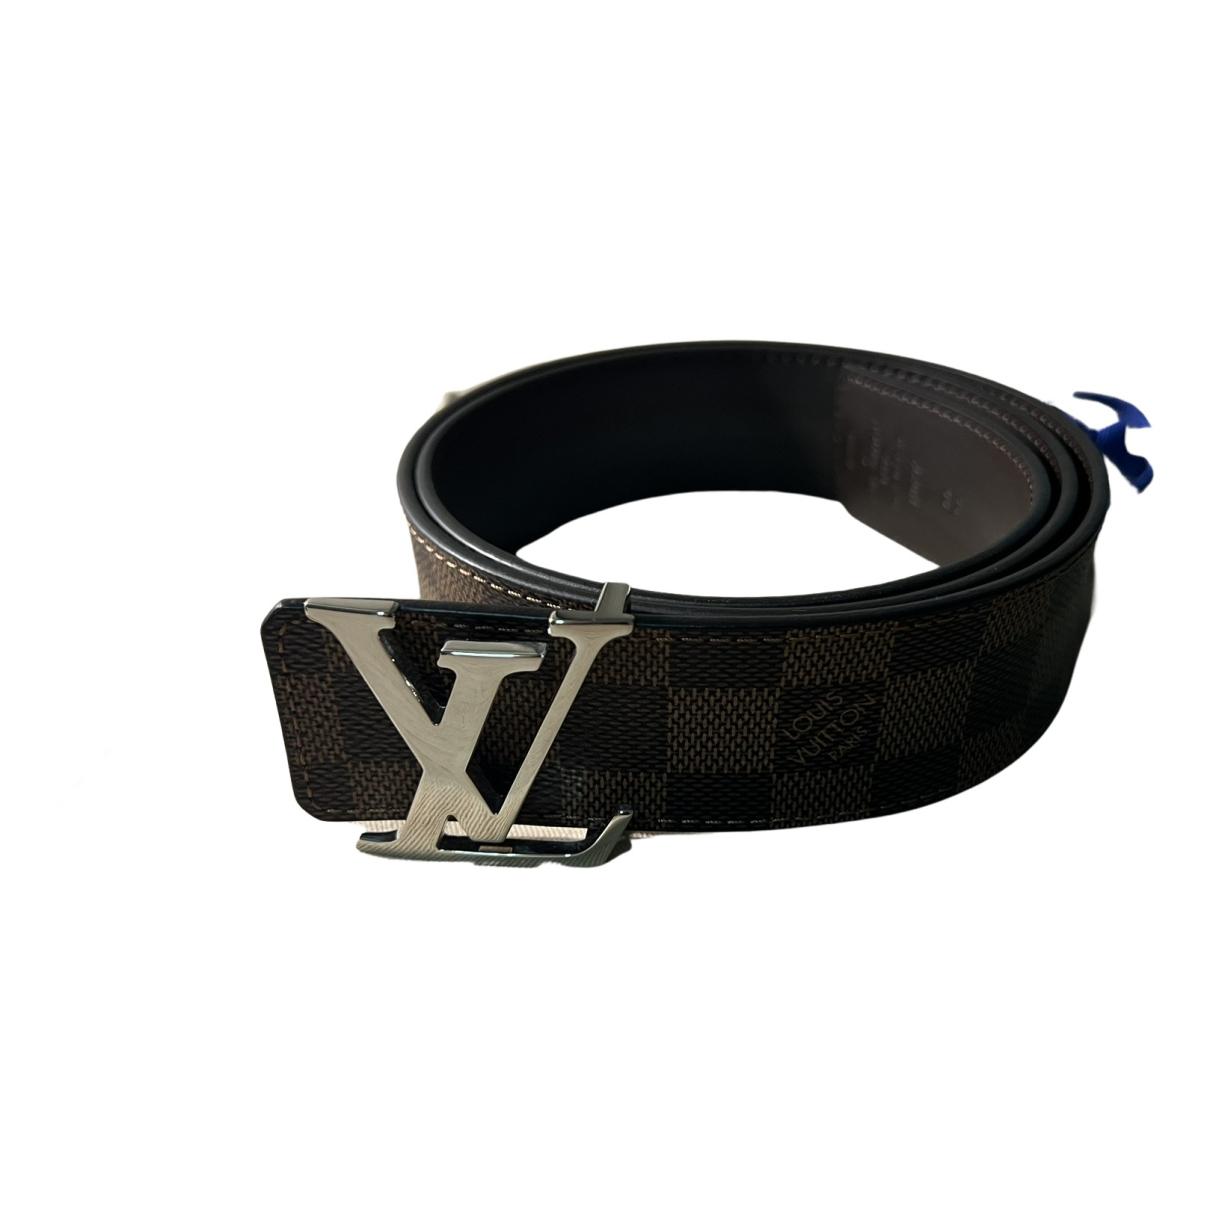 Initiales leather belt Louis Vuitton White size 90 cm in Leather - 24907834